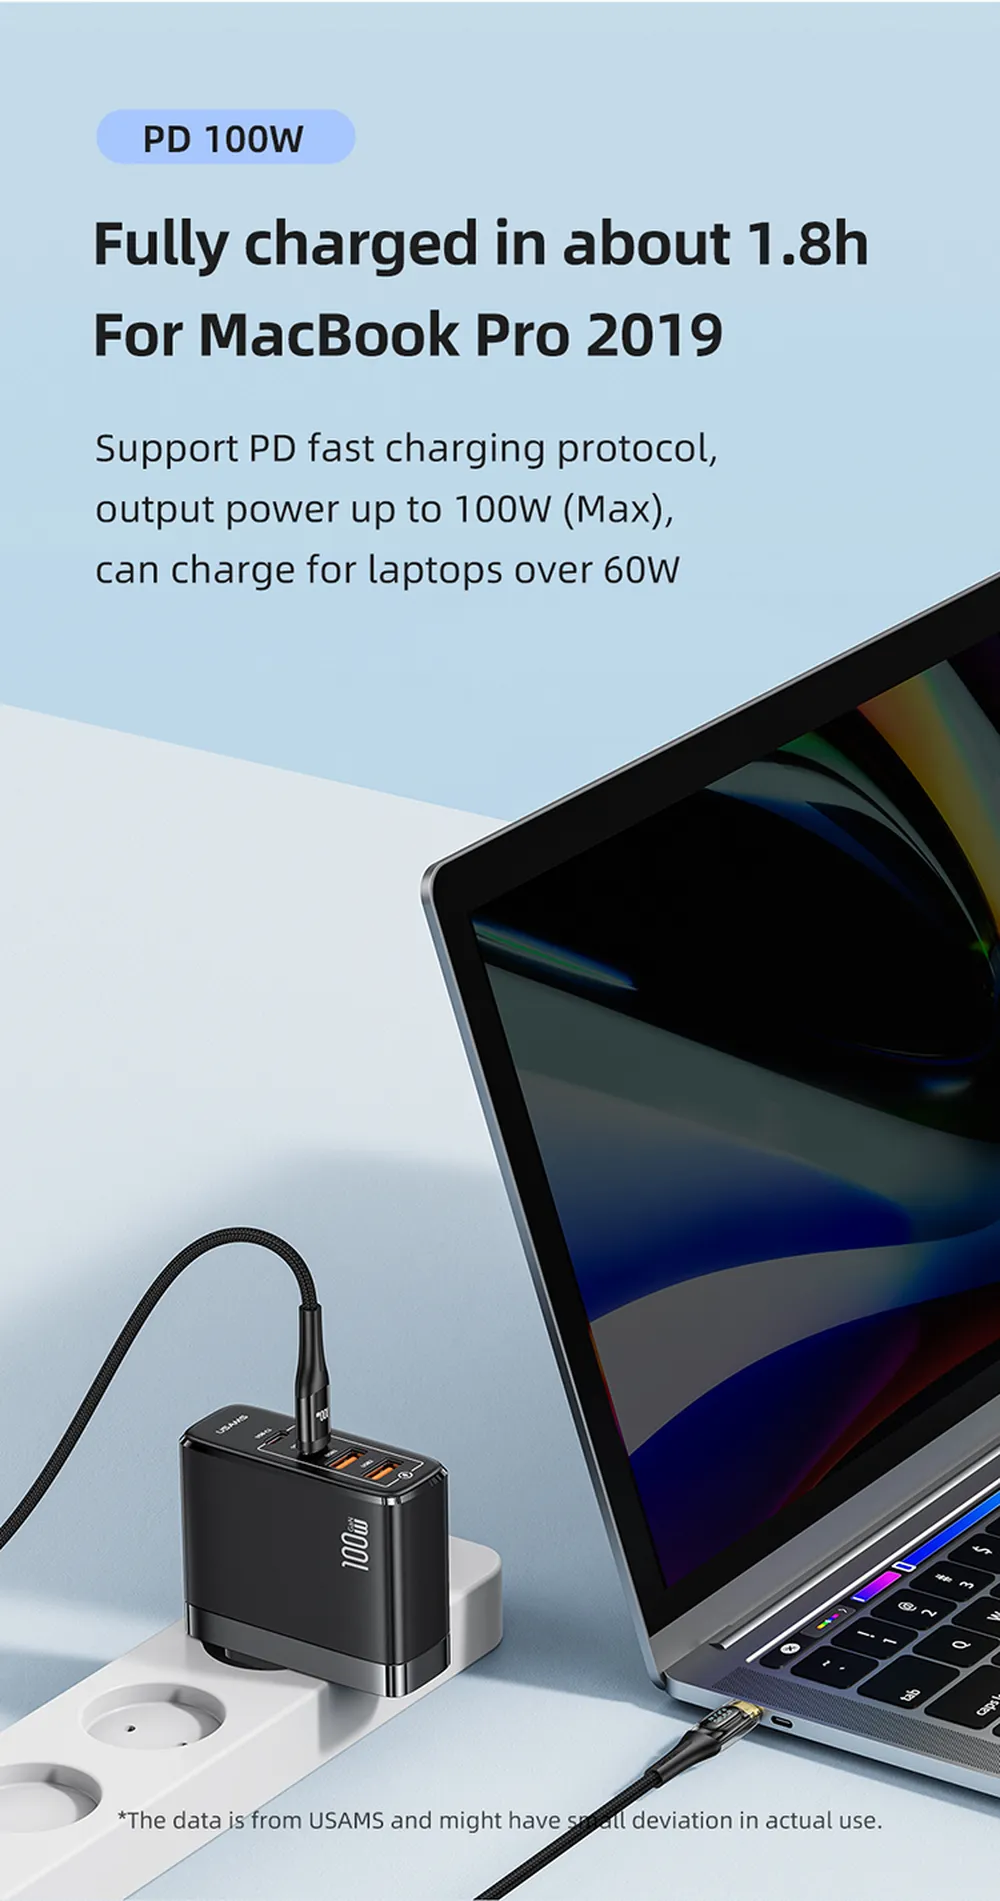 Features:
Transparent mechanical design, clearly display of inner precise components
Display charging power, more intuitive than the old voltage/current type
Support PD fast charging protocol, output power up to 100W(Max), can charge for laptops over 60W
Downward compatible with 30W charging power, faster than the original 18W
5A high current flash charge for Huawei/for Xiaomi/for Samsung
With multi-strand anti-oxidation tinned copper core, multi-layer high-density shielding, more stable transmission, fast and safe charging
Gold plated connector, anti-oxidation and sensitive, durable and fashionable
Built-in E-Marker chip, which will auto output the current in real-time, ensure current safety
Nylon cross-braided cable, flexible tangle-free, bendable and durable
480Mbps theoretical transfer rate, transfer 1G file in about 30s
Specifications:

Brand: USAMS
Model: US-SJ591
Length: 2m
Material: Aluminum Alloy+PVC+Braided Cable
Power: 100W (Max)
Data Transmission Rate: 480Mbps
Compatibility: For devices with Type-C port